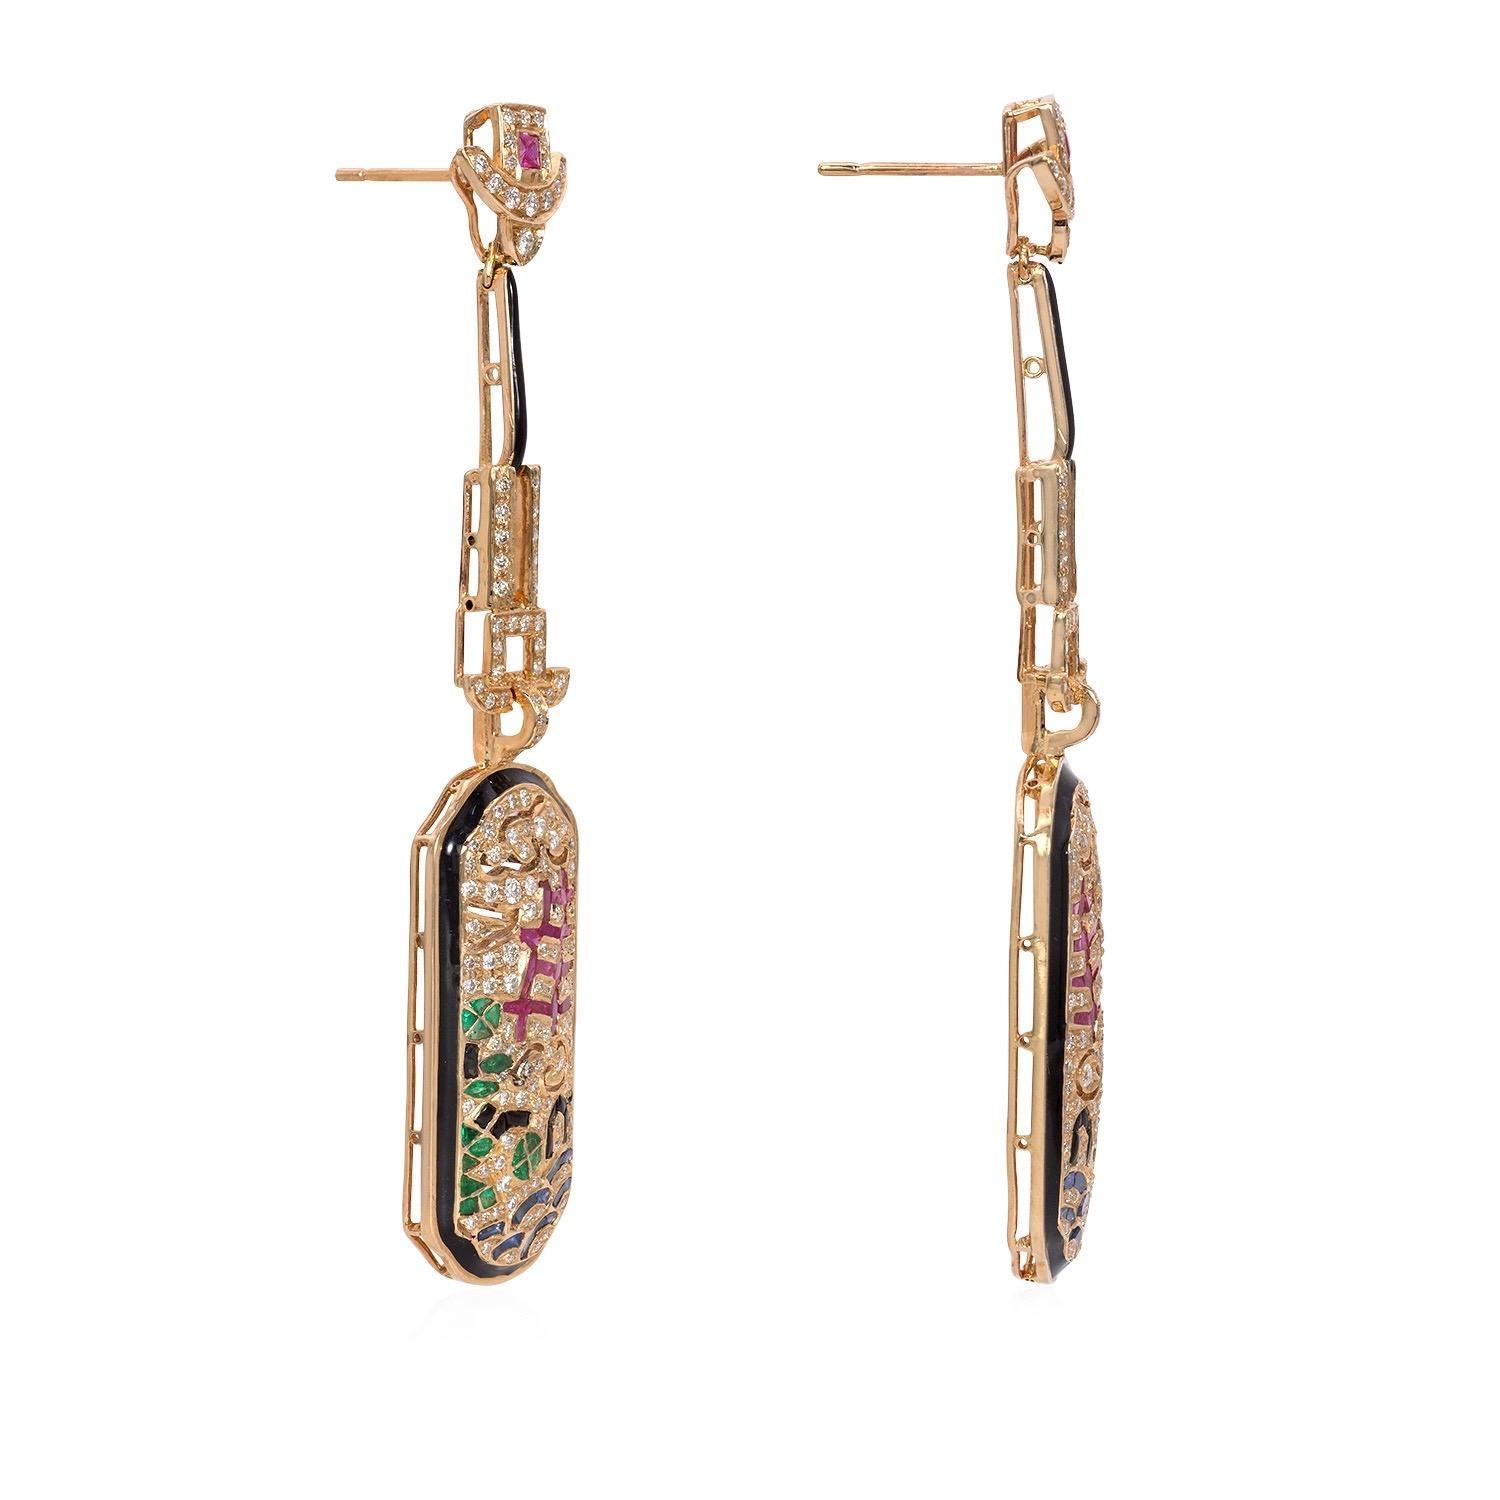 Japanese Art Deco inspired earrings, featuring natural rubies, blue sapphire and emeralds, set in 18K rose gold. 

Diamond Details 
Shape: Round Brilliant Cut Diamonds 
Color: G 
Clarity: VS 
Weight: 1.85 carats 

Earring Details: 
Metal: 18K Rose